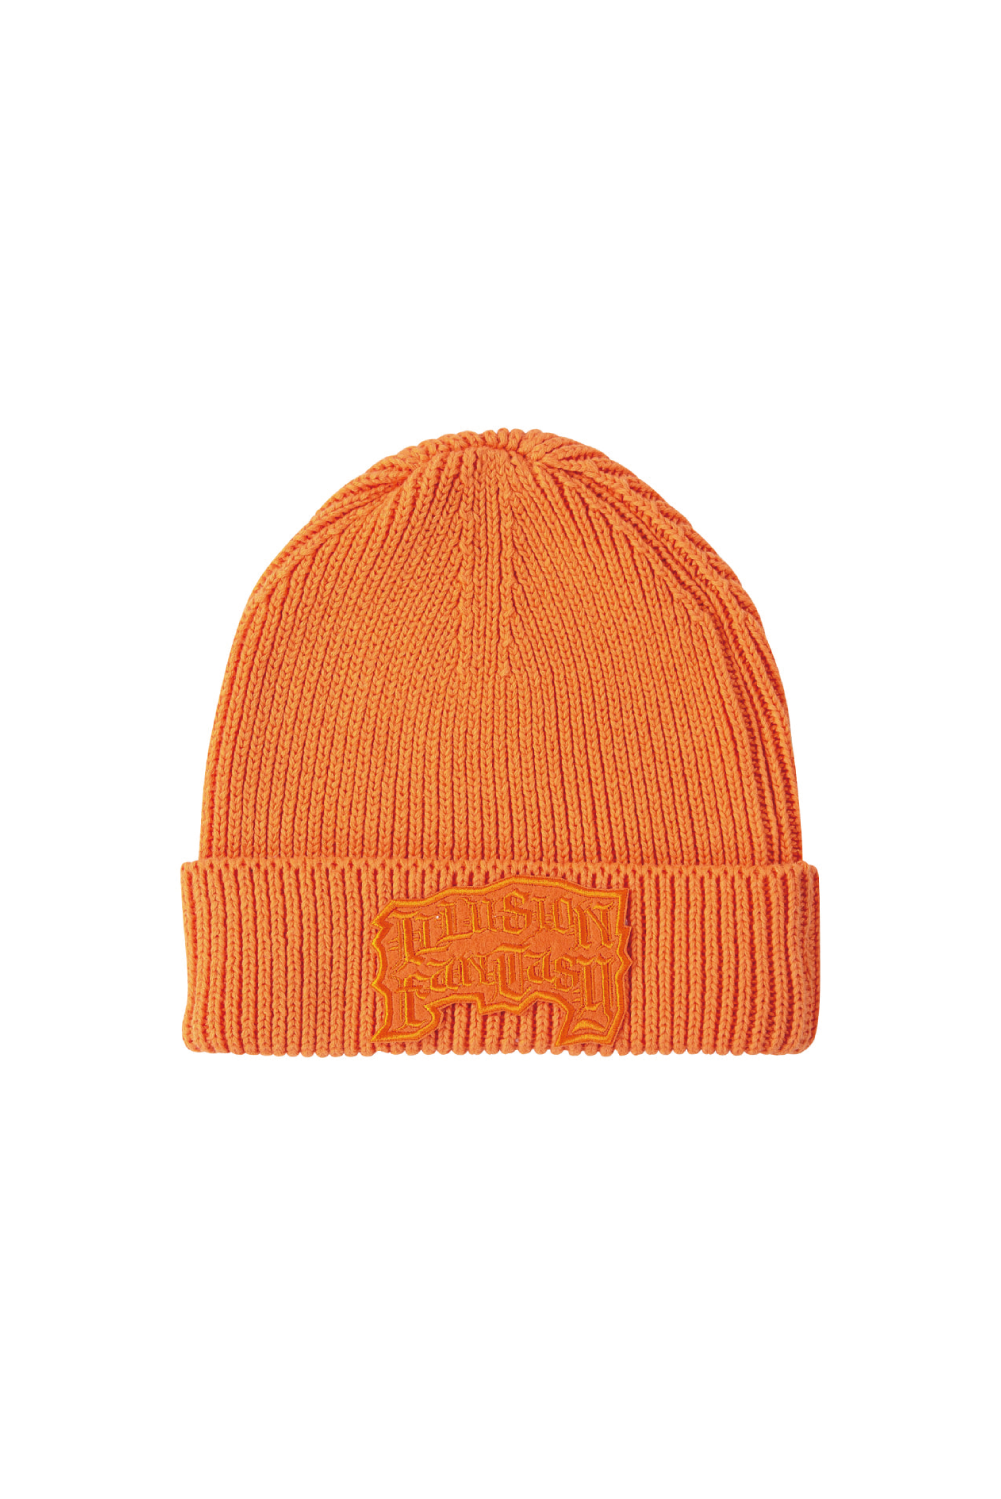 ILLUSION FANTASY PATCHED BEANIE (ORANGE)GRAFFITIONMIND